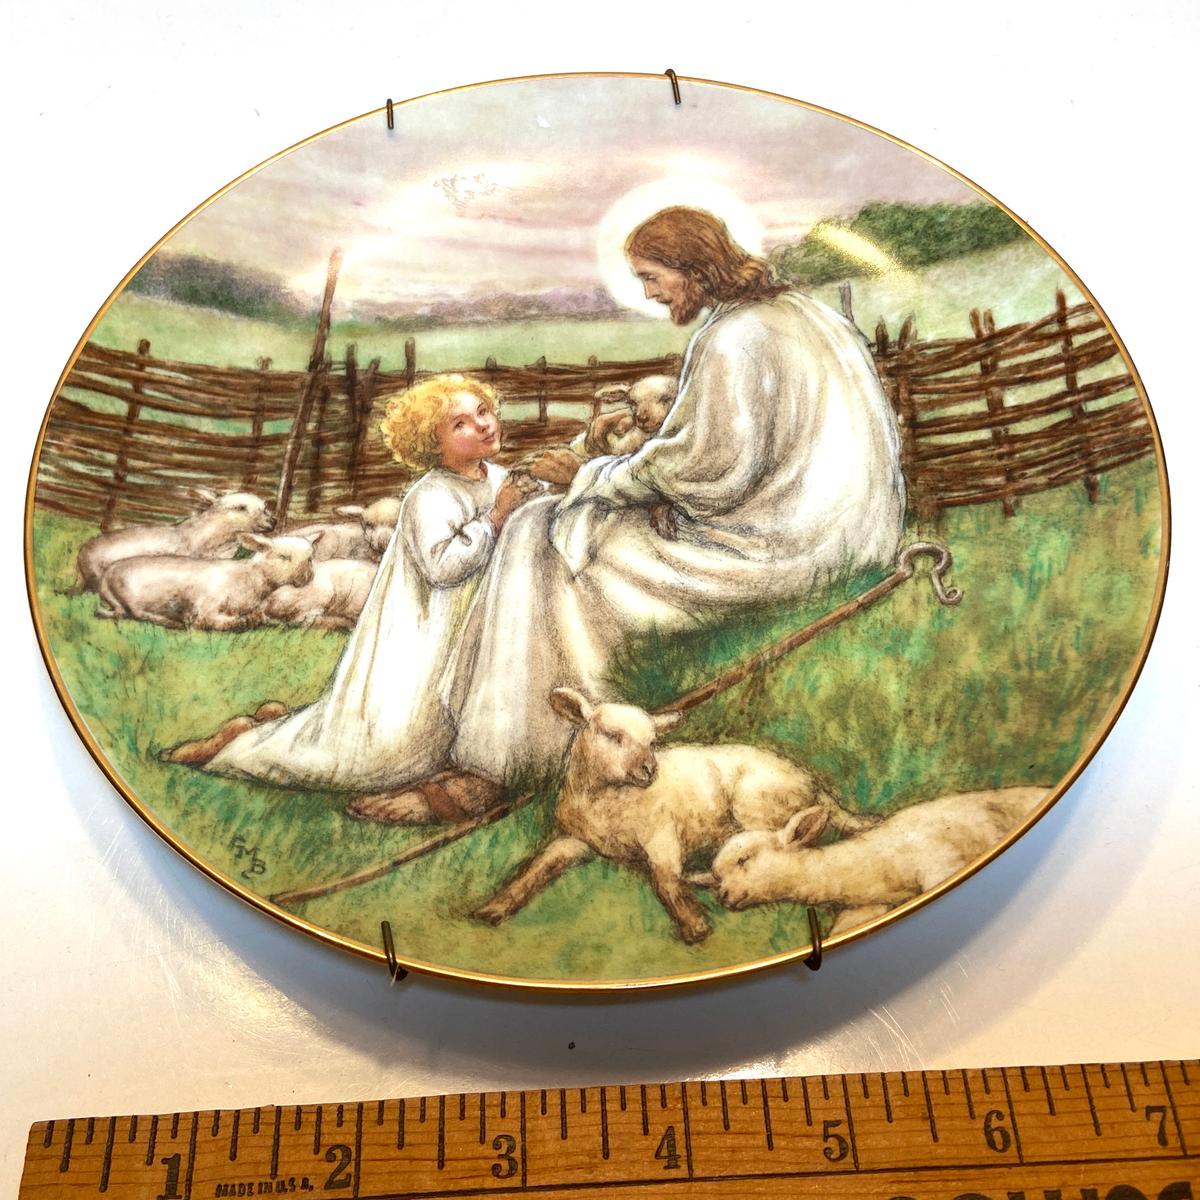 1988 “The Lord’s My Shepherd” Fine China Collector's Plate